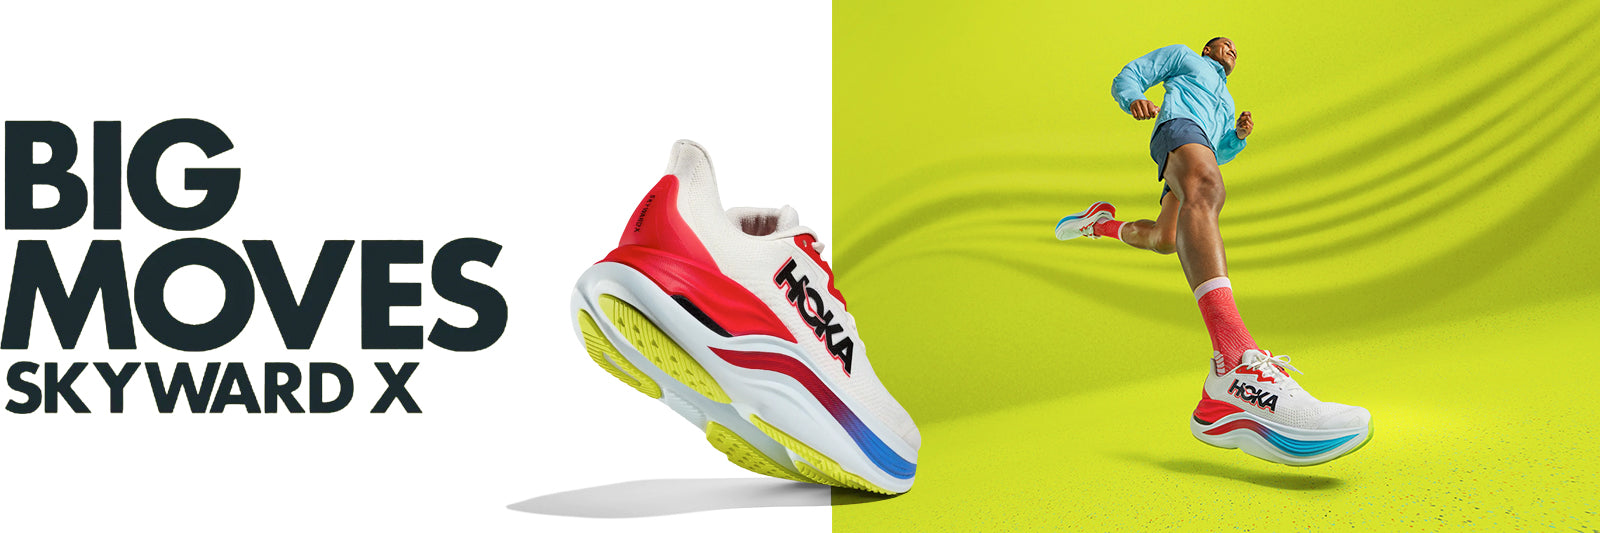 An image featuring the HOKA Skyward X shoe overlaid on a picture of a man running, with a vibrant background. Text overlay reads 'Big Moves Skyward X', highlighting the dynamic energy and performance of the shoe